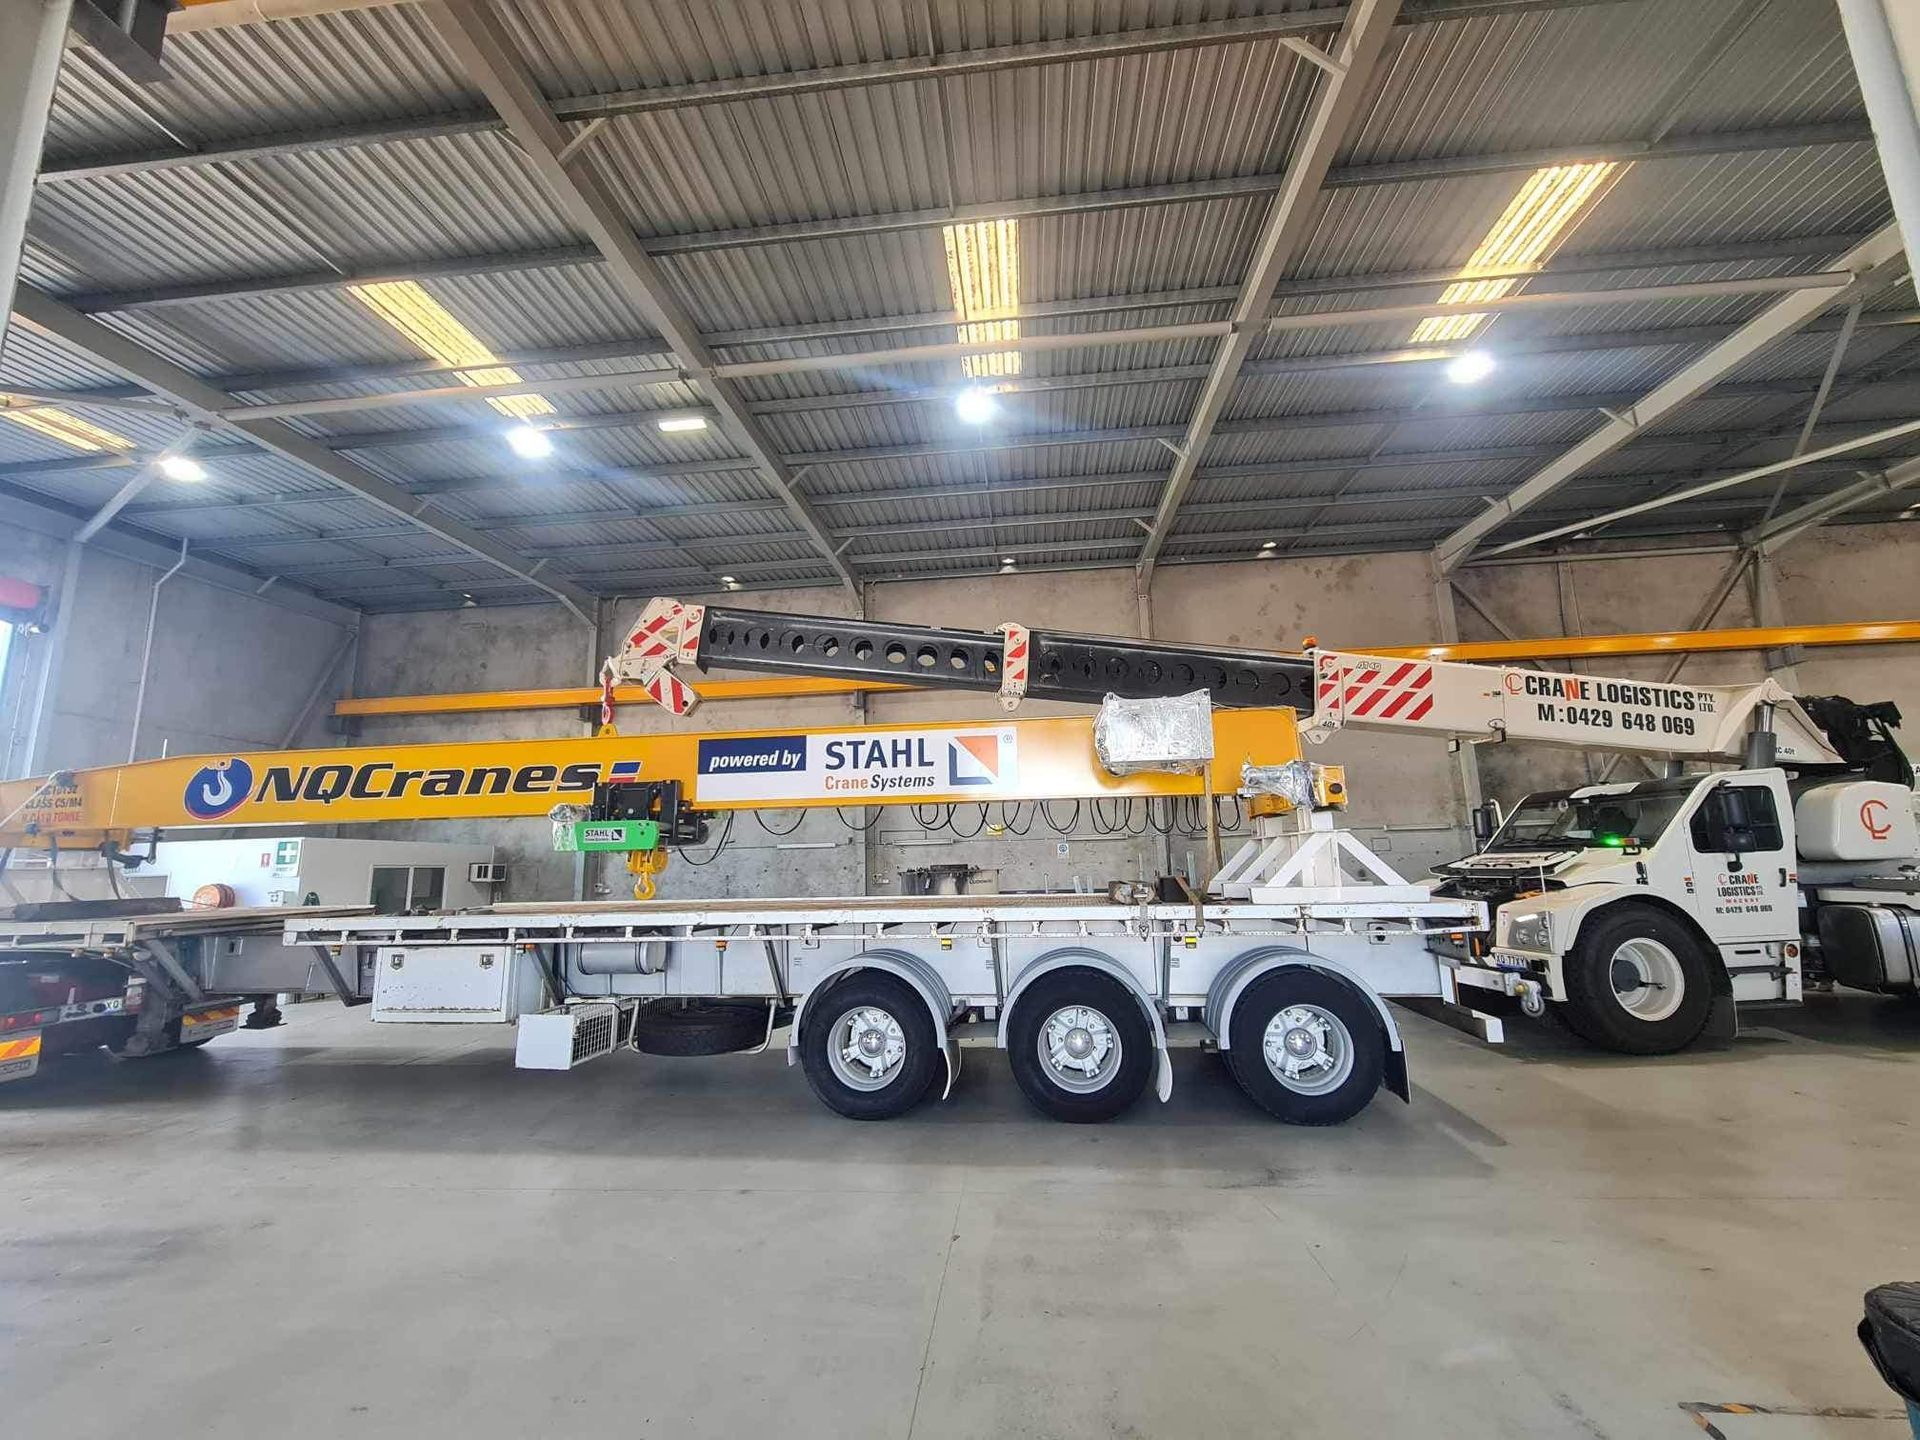 A Yellow Mobile Crane — Cranes for Hire in Mackay, QLD